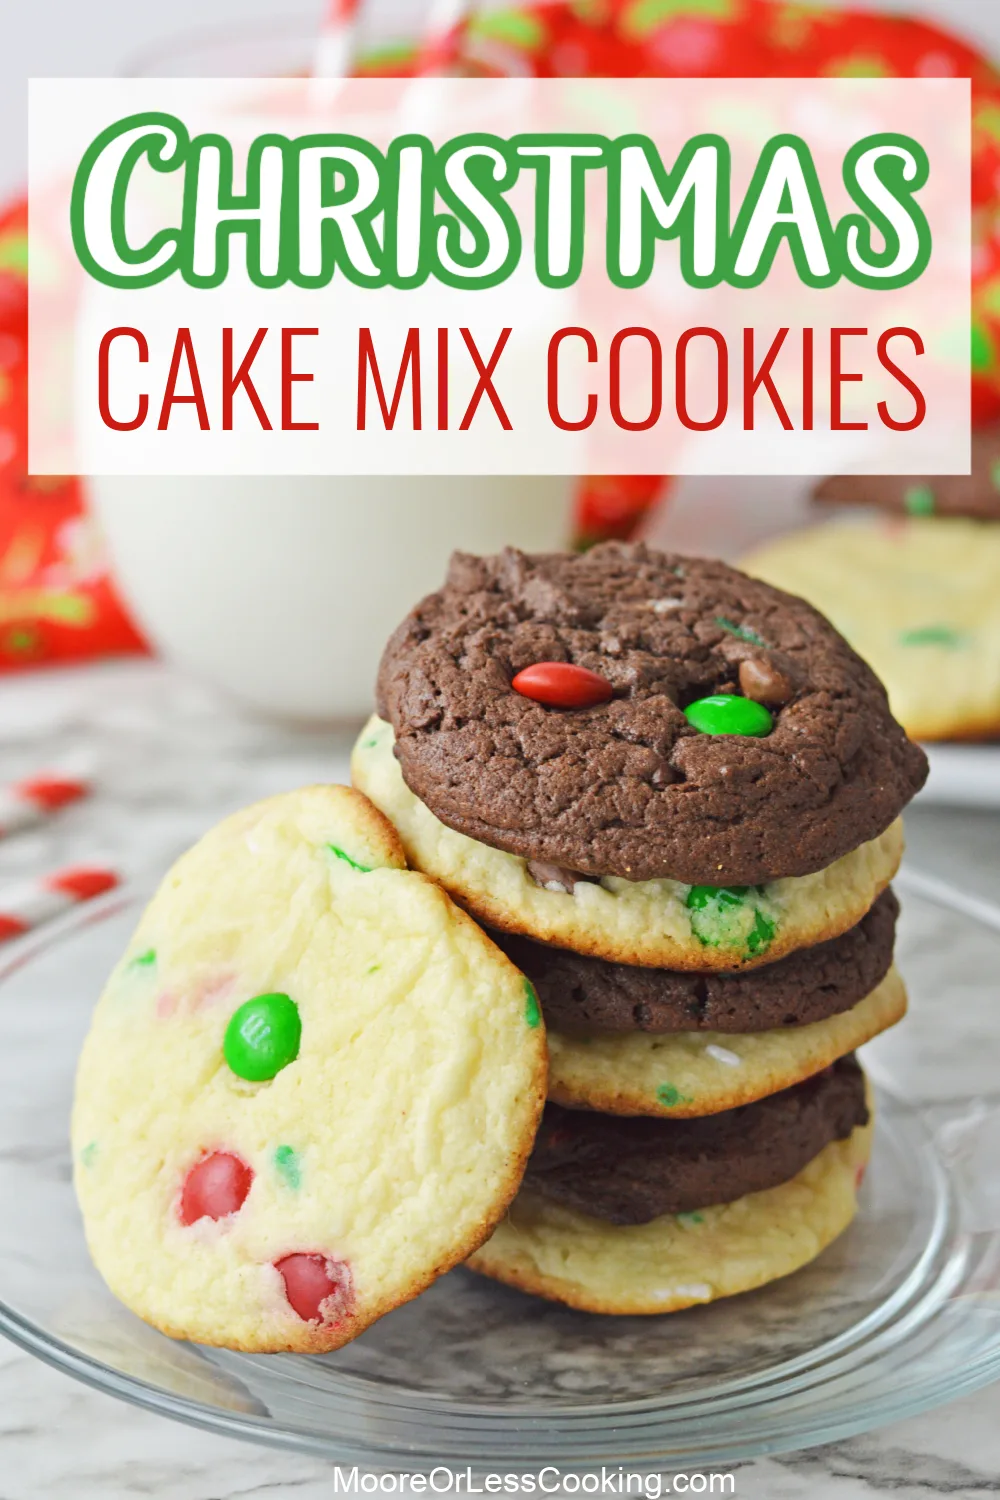 Light, fluffy and scrumptious, these Christmas Cake Mix Cookies are an easy way to bake up a batch of holiday sweetness that's studded with red and green M&Ms and sprinkles for a festive touch. via @Mooreorlesscook